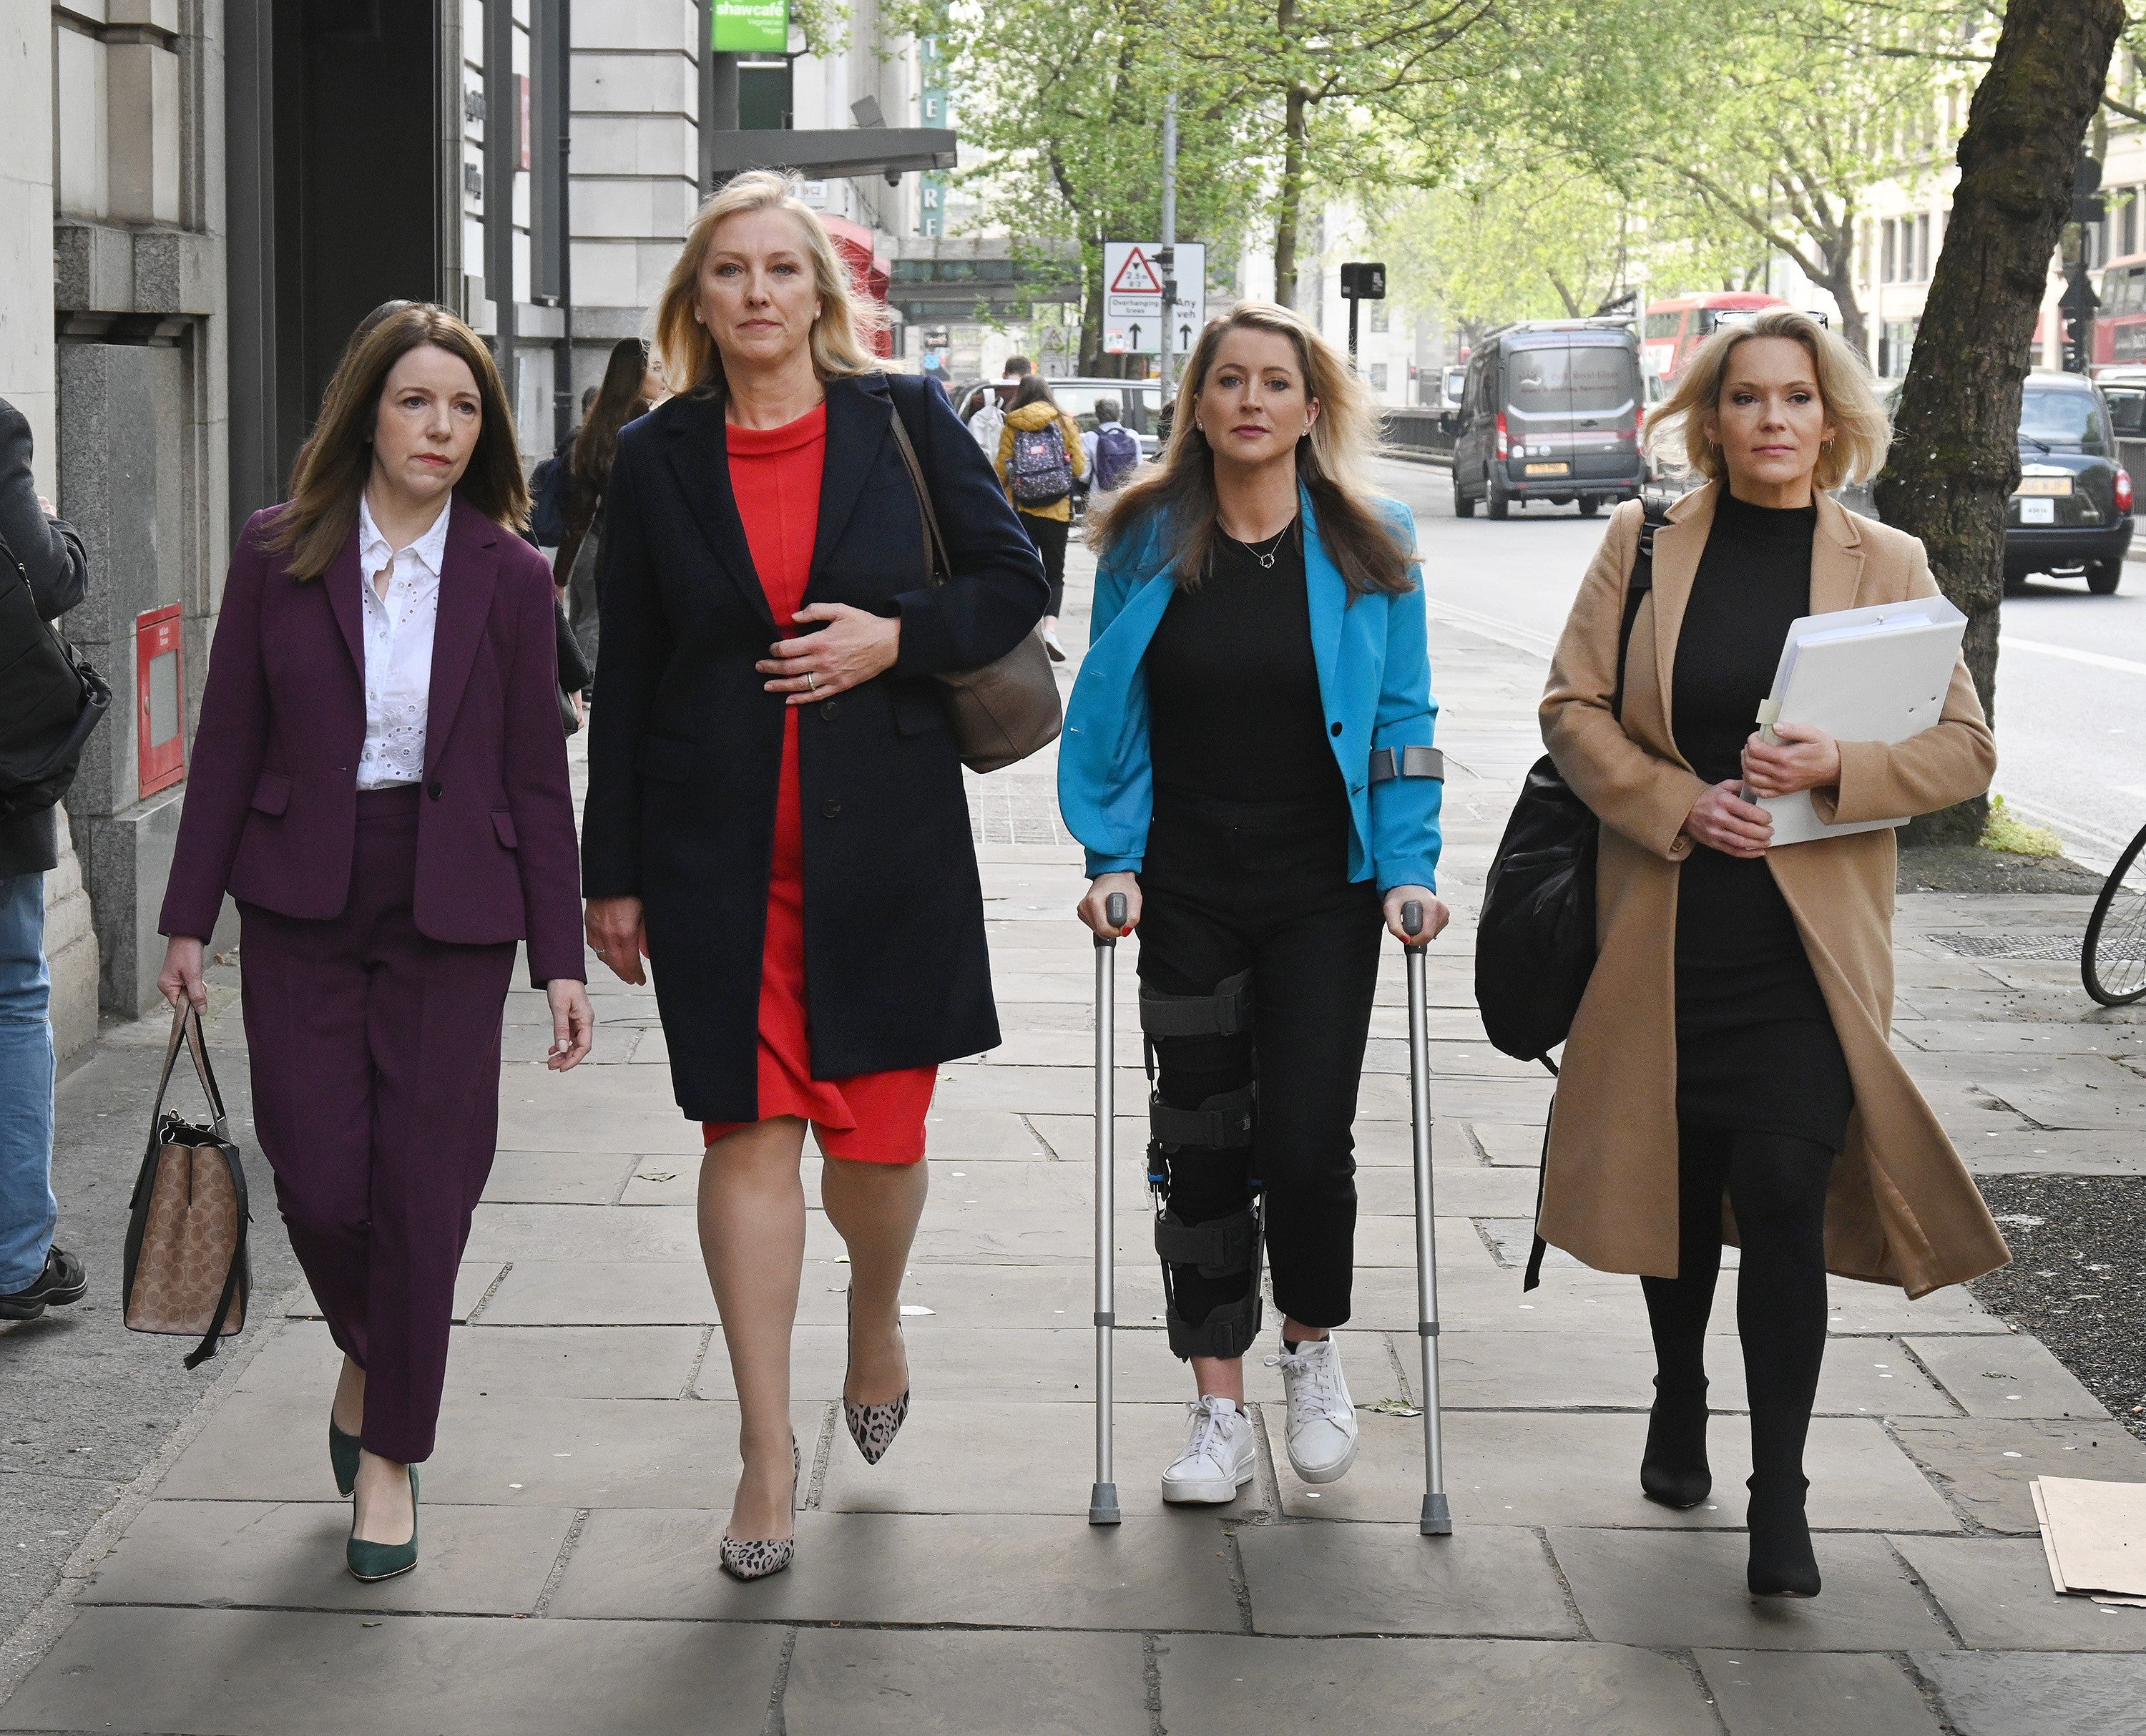 (From left) Annita McVeigh, Martine Croxall, Karin Giannone, and Kasia Madera arriving at the London central employment tribunal in Kingsway on Wednesday